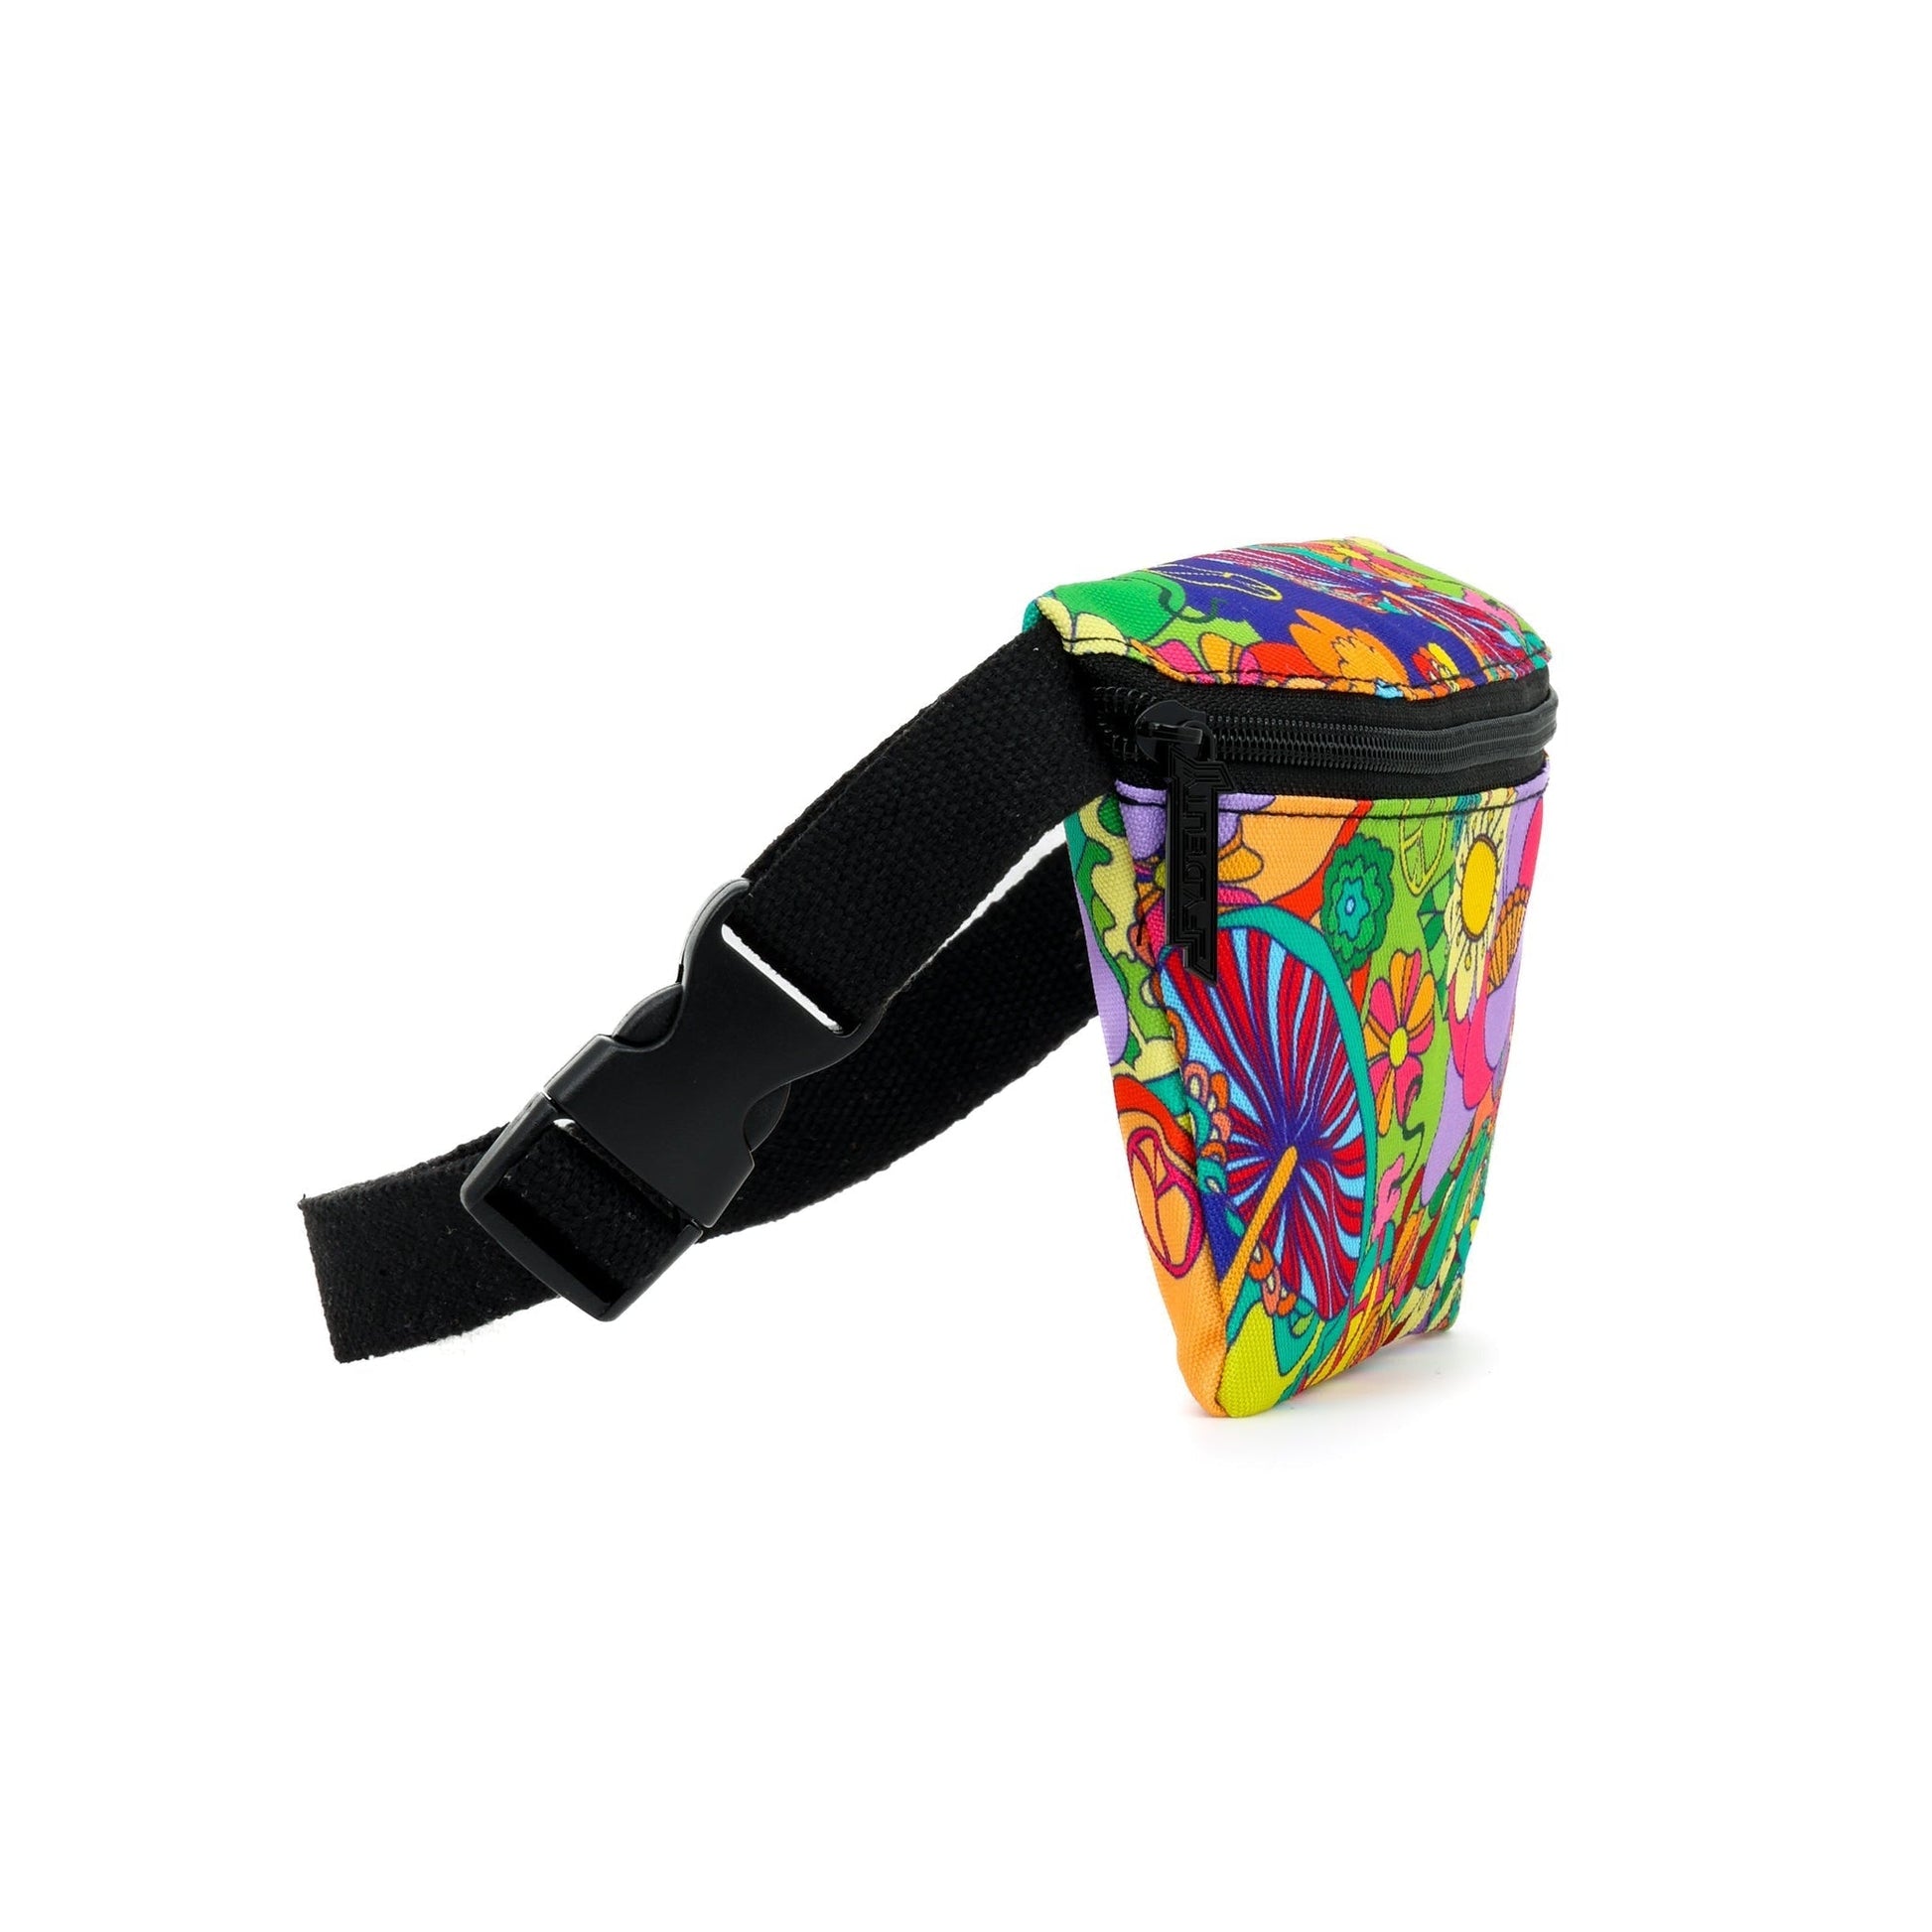 Wonderland 70's Psychedelic Small Ultra Slim Fanny Pack